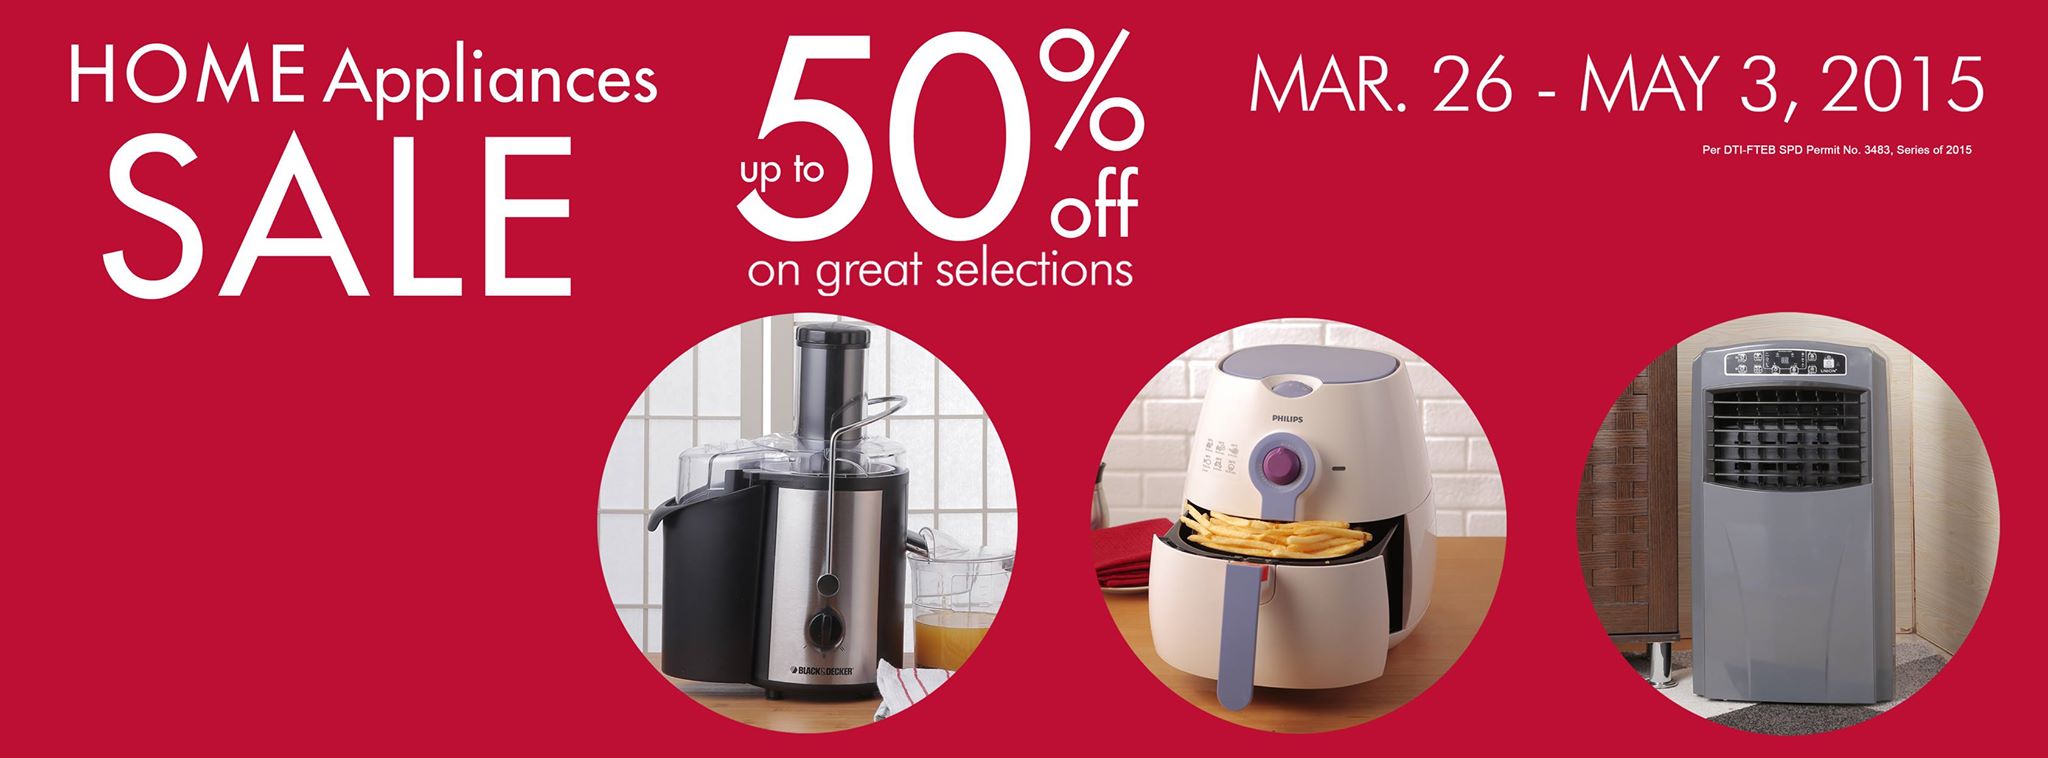 SM Home: Home Appliances Sale March - May 2015